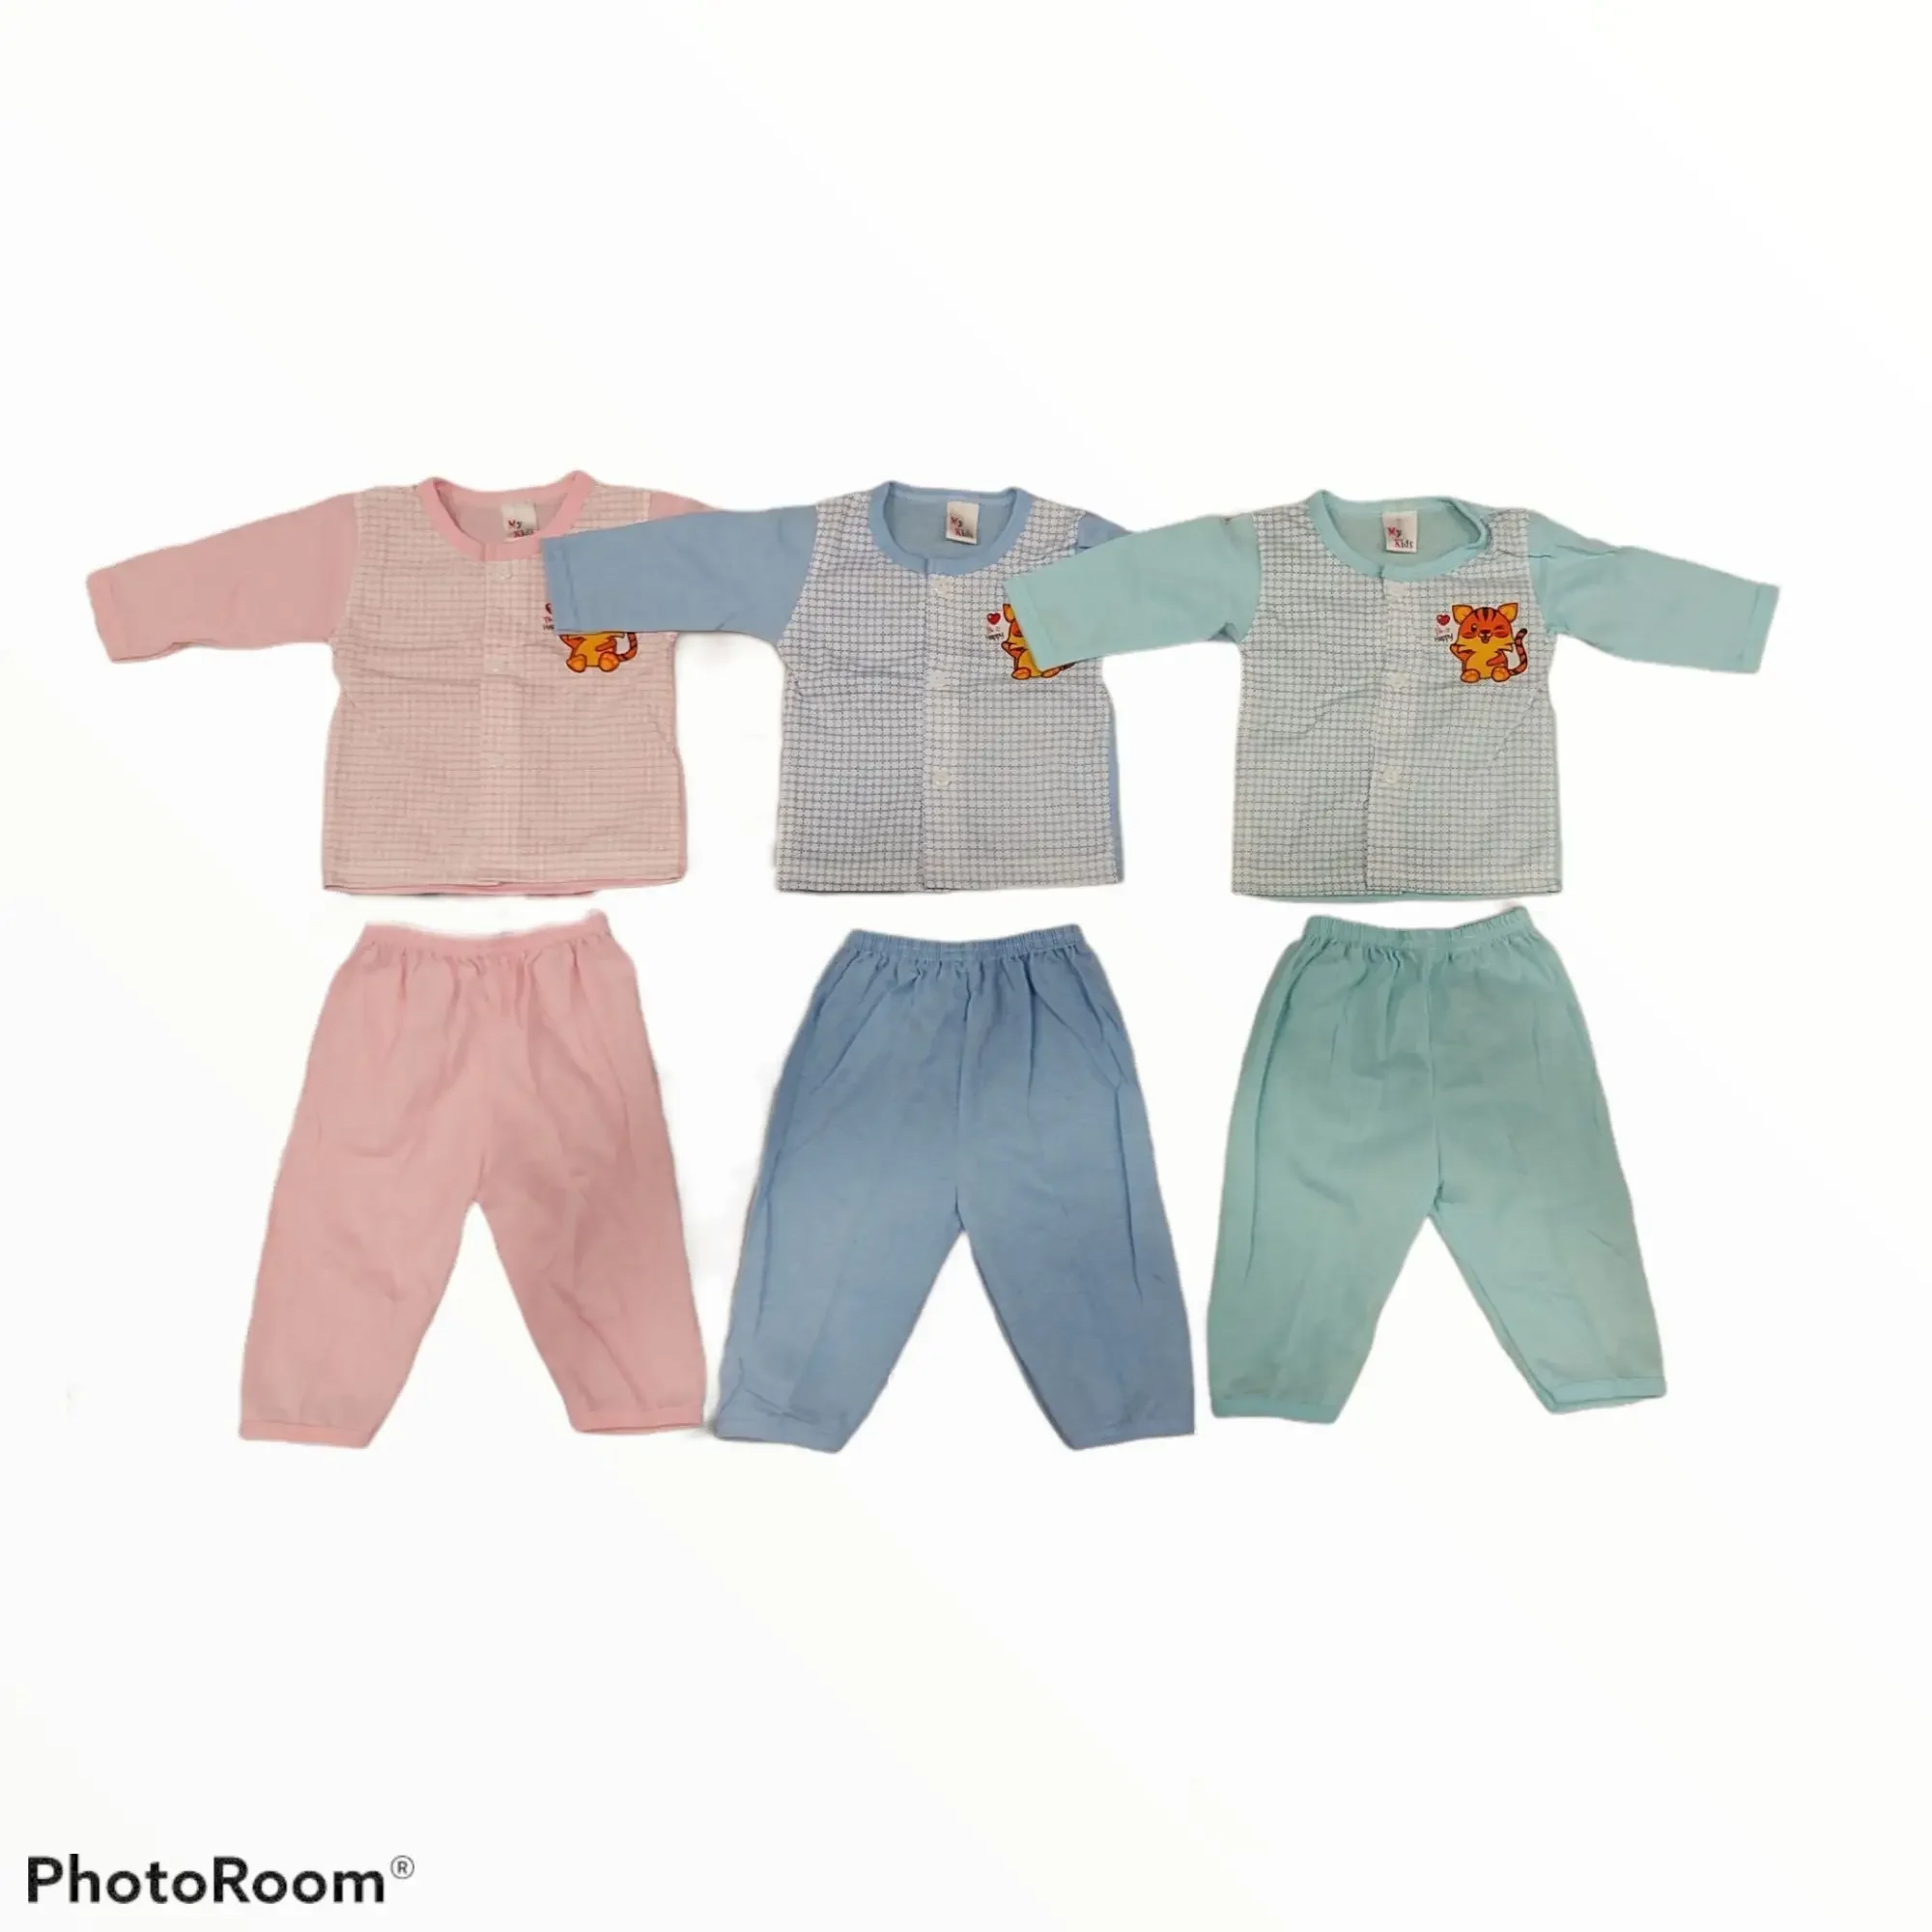 NEW BORN BABY CLOTHES SET NEW BORN 0 MONTH - 6 MONTH BAJU BABY MYKIDS